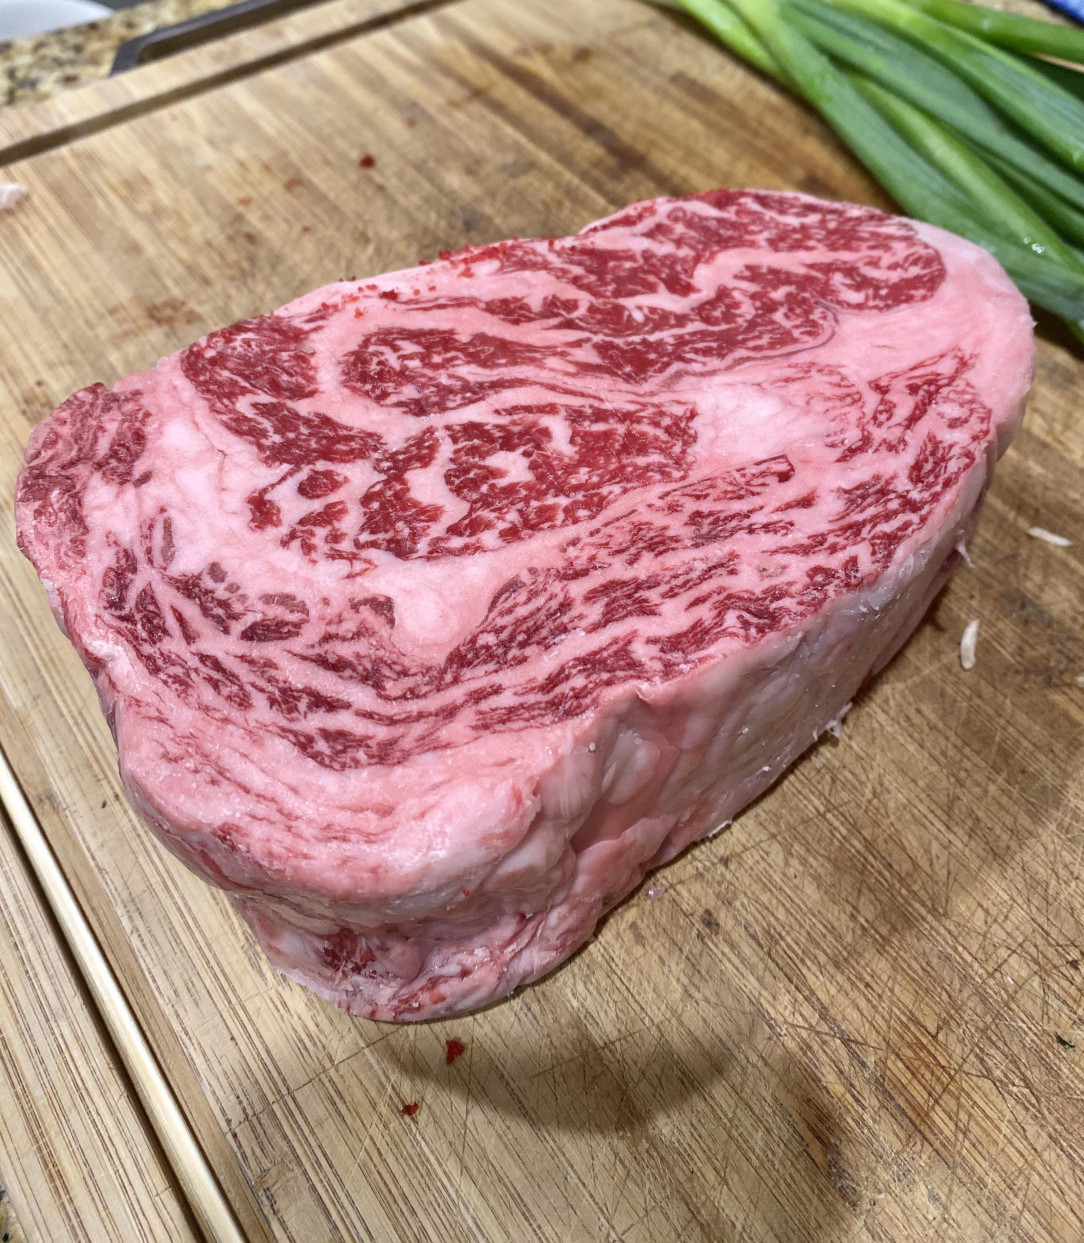 First time trying wagyu tonight!